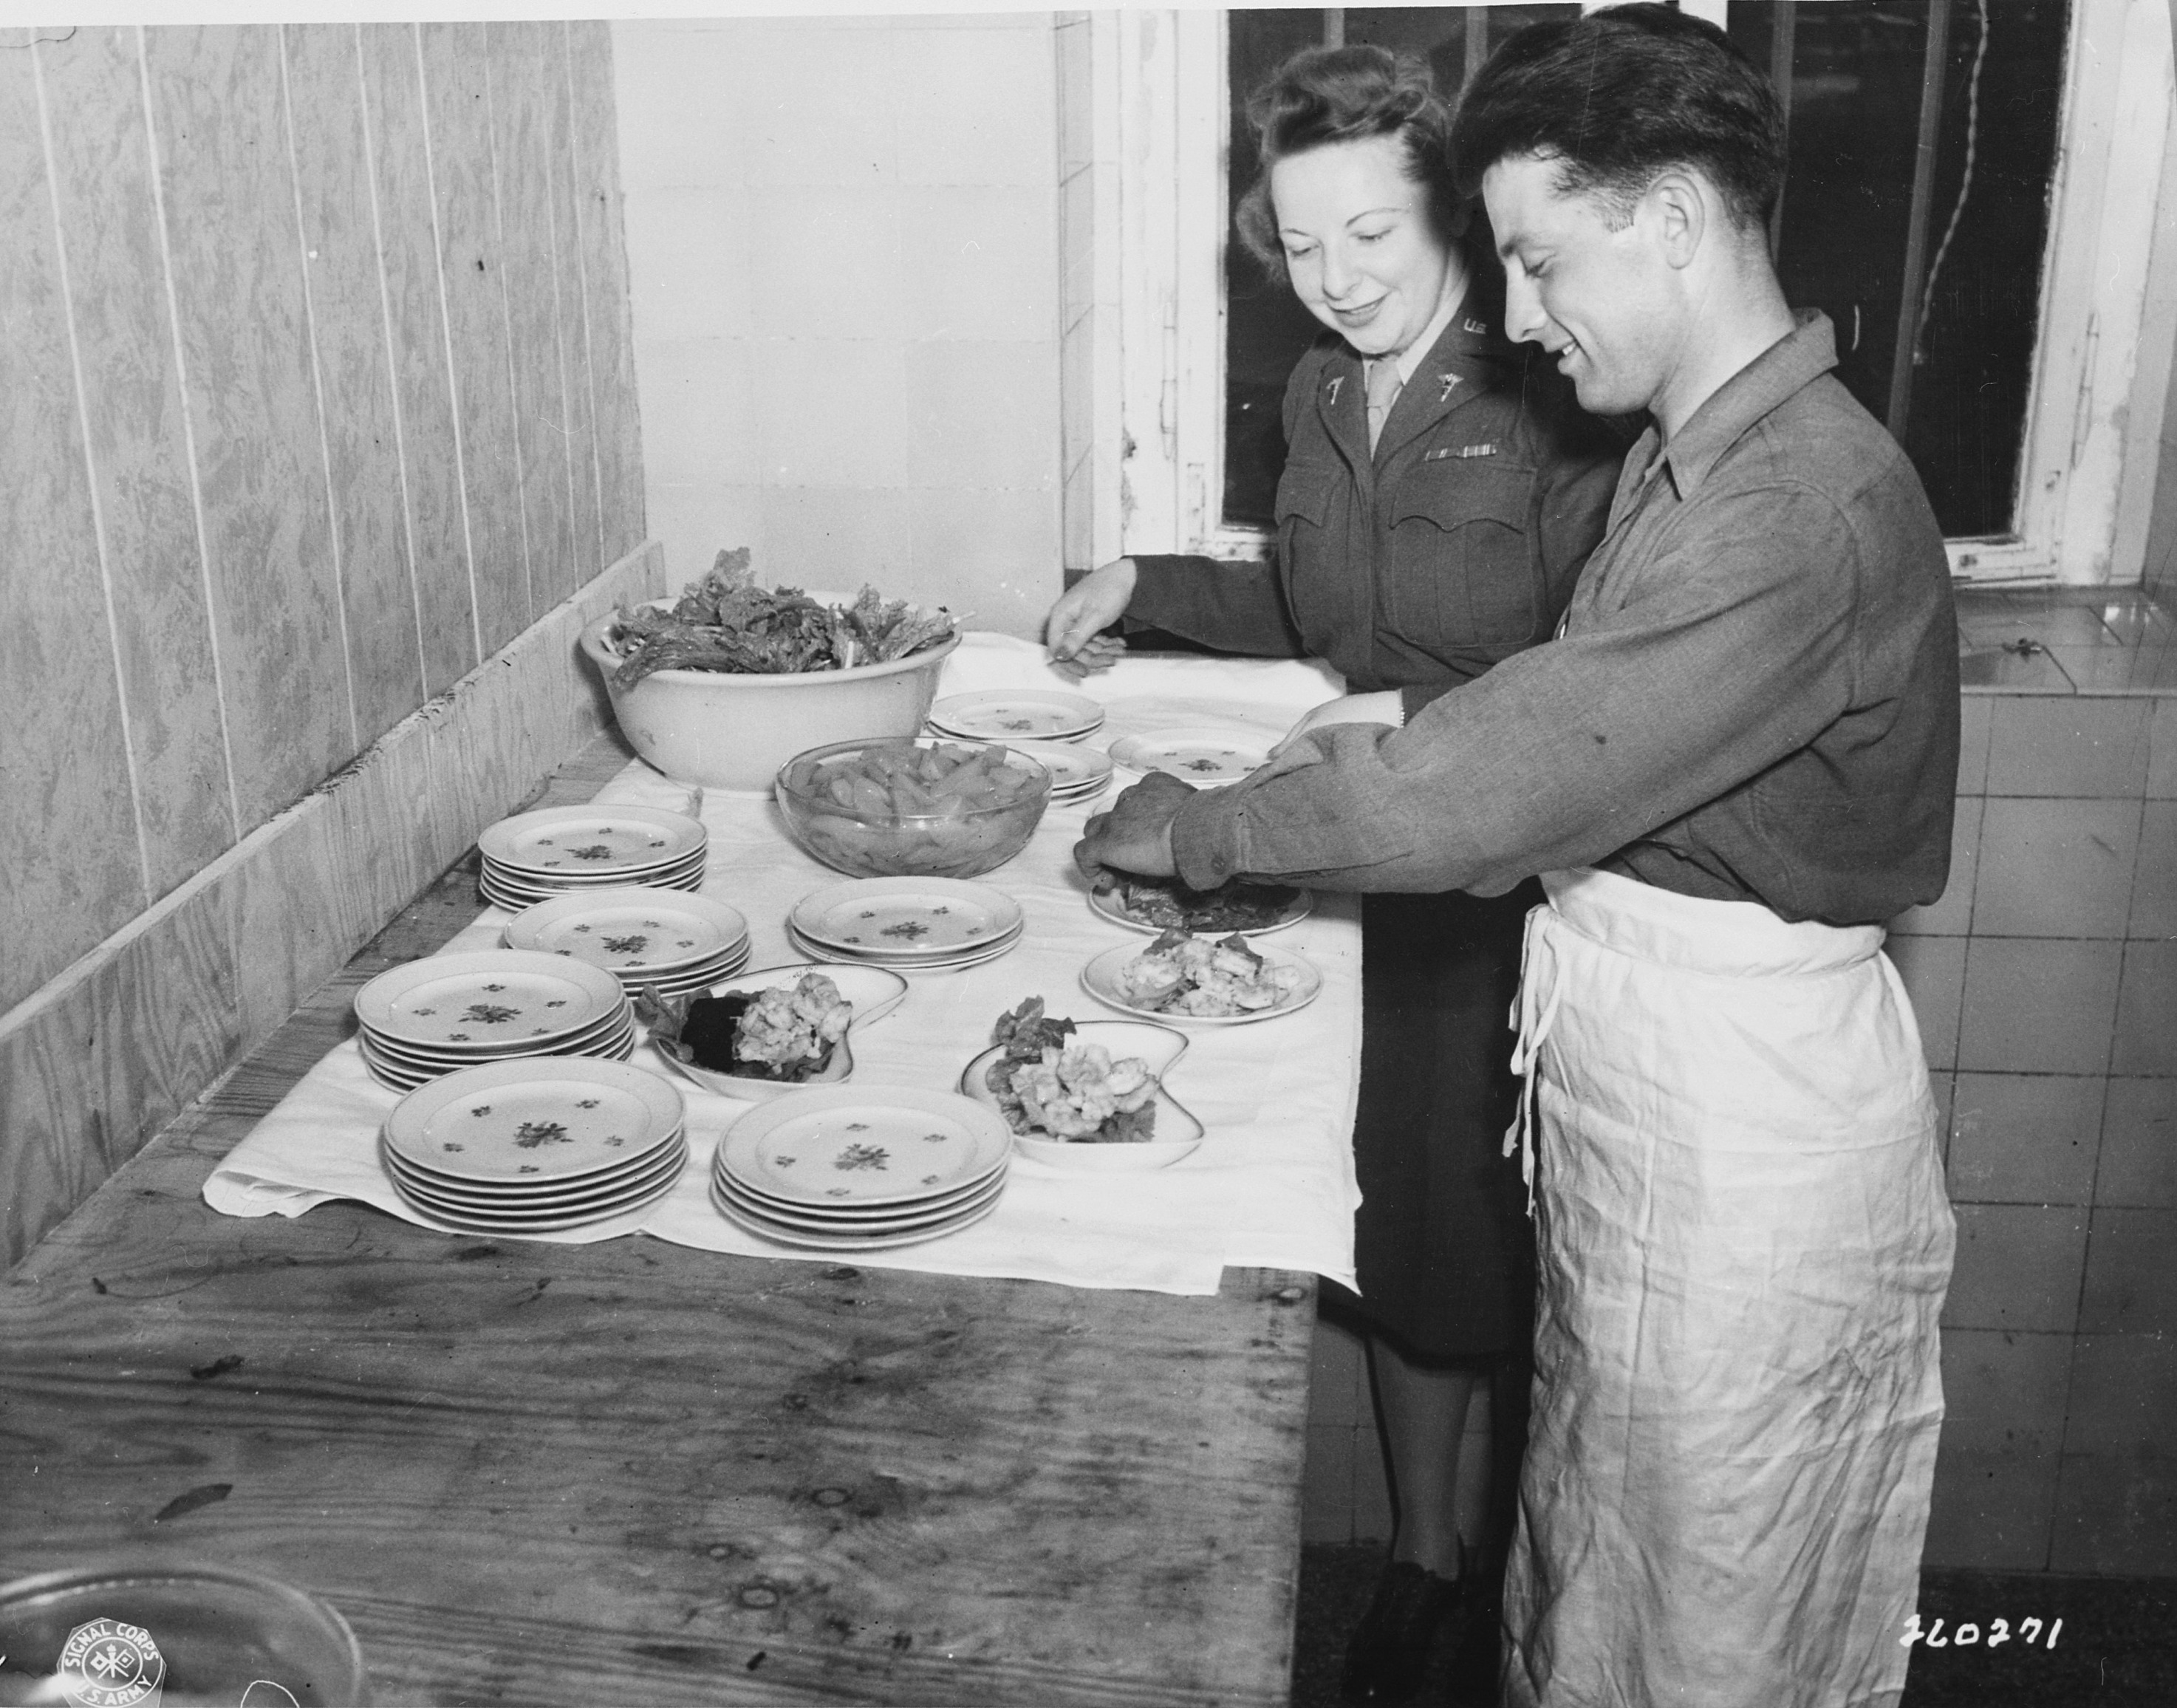 Lieutenant May Felts, chief dietician to the American delegation to the Potsdam Conference, inspecting the food being prepared, Germany, 16 Jul 1945